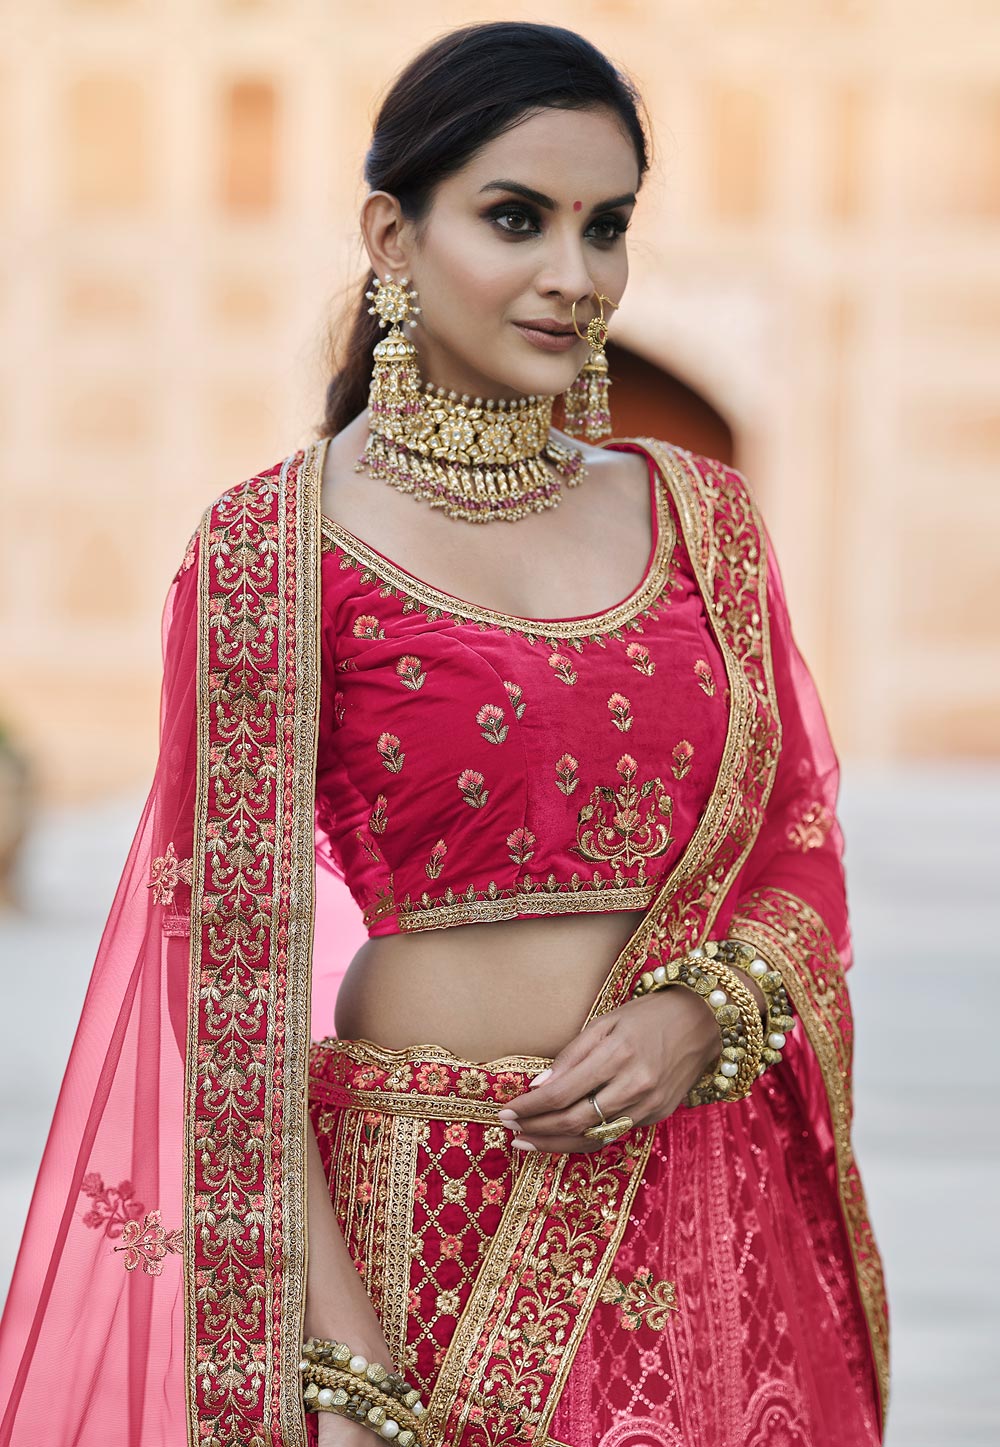 Contrasting Jewellery To Wear With Your Pink Lehenga! | Pink lehenga,  Indian bridal fashion, Indian bridal dress